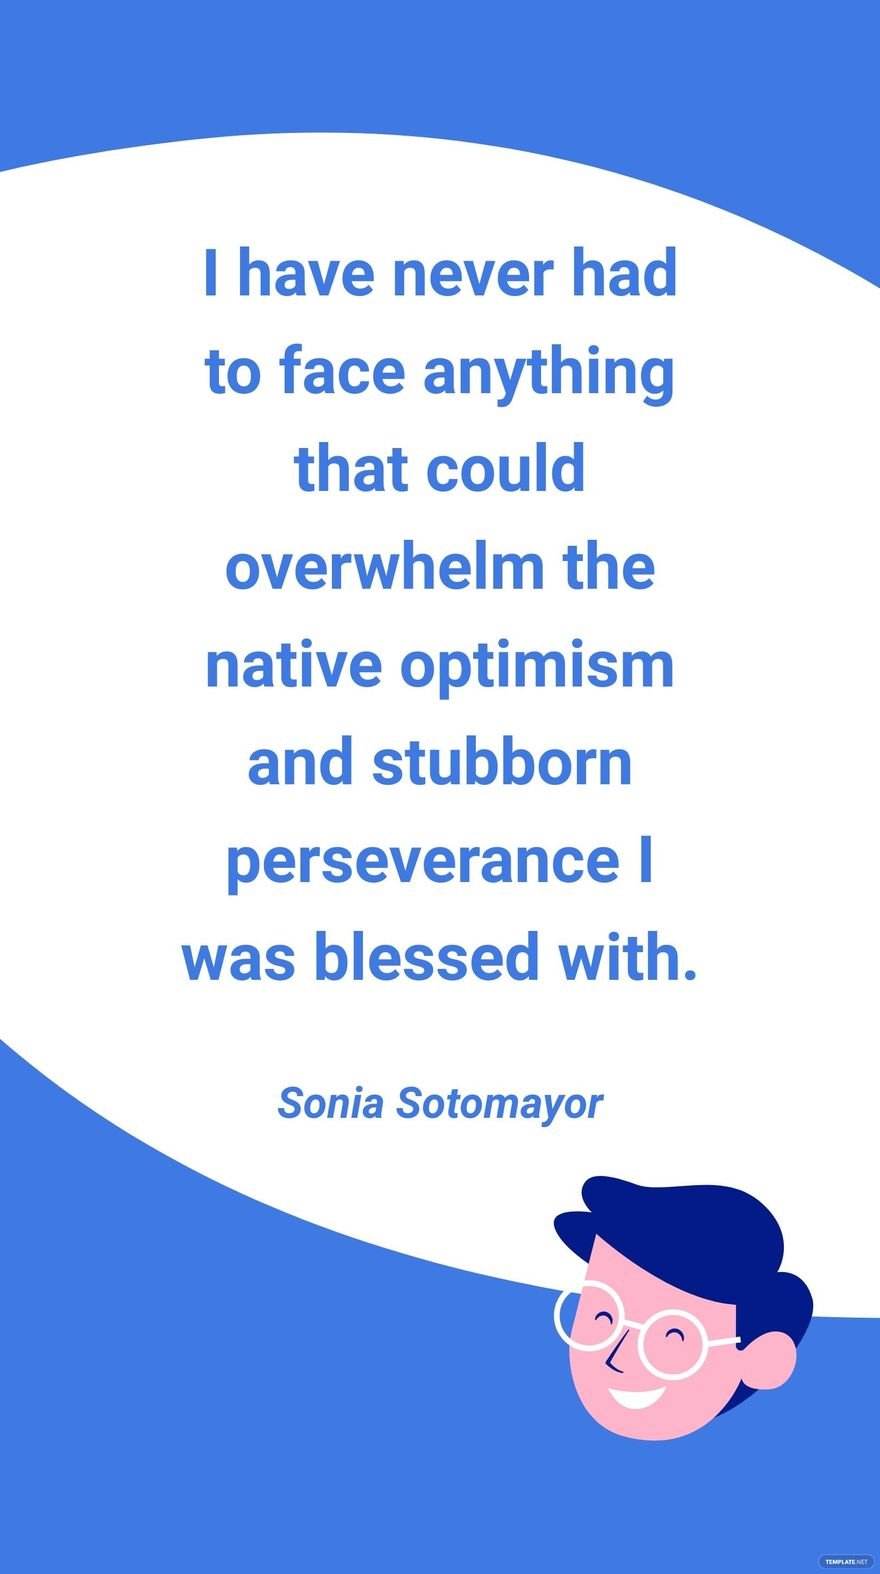 Sonia Sotomayor - I have never had to face anything that could overwhelm the native optimism and stubborn perseverance I was blessed with. in JPG